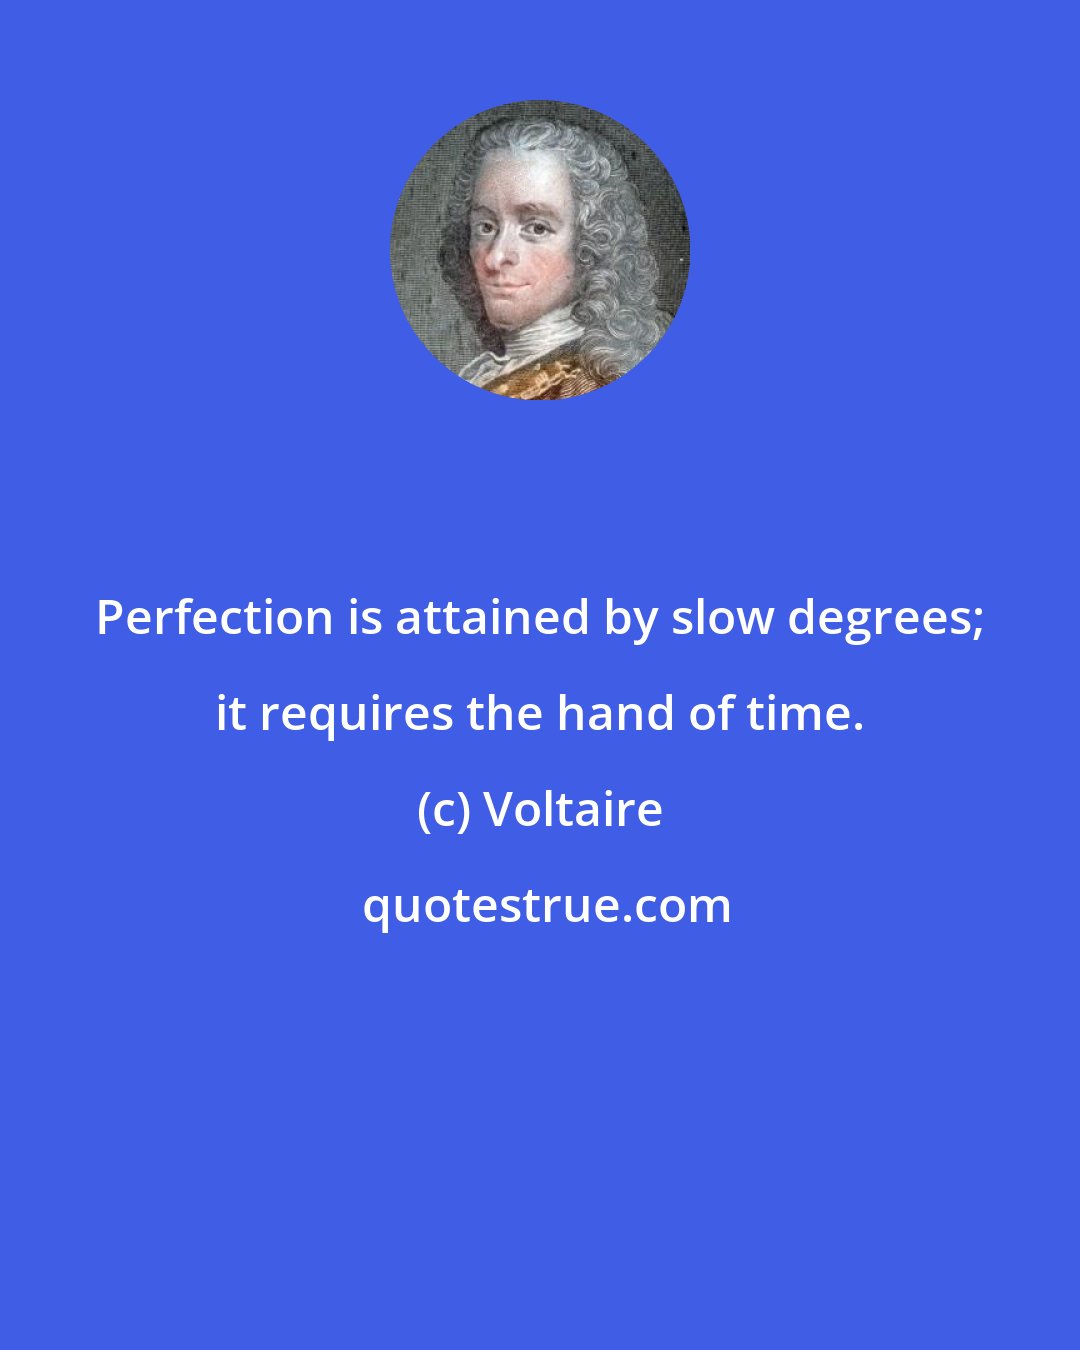 Voltaire: Perfection is attained by slow degrees; it requires the hand of time.